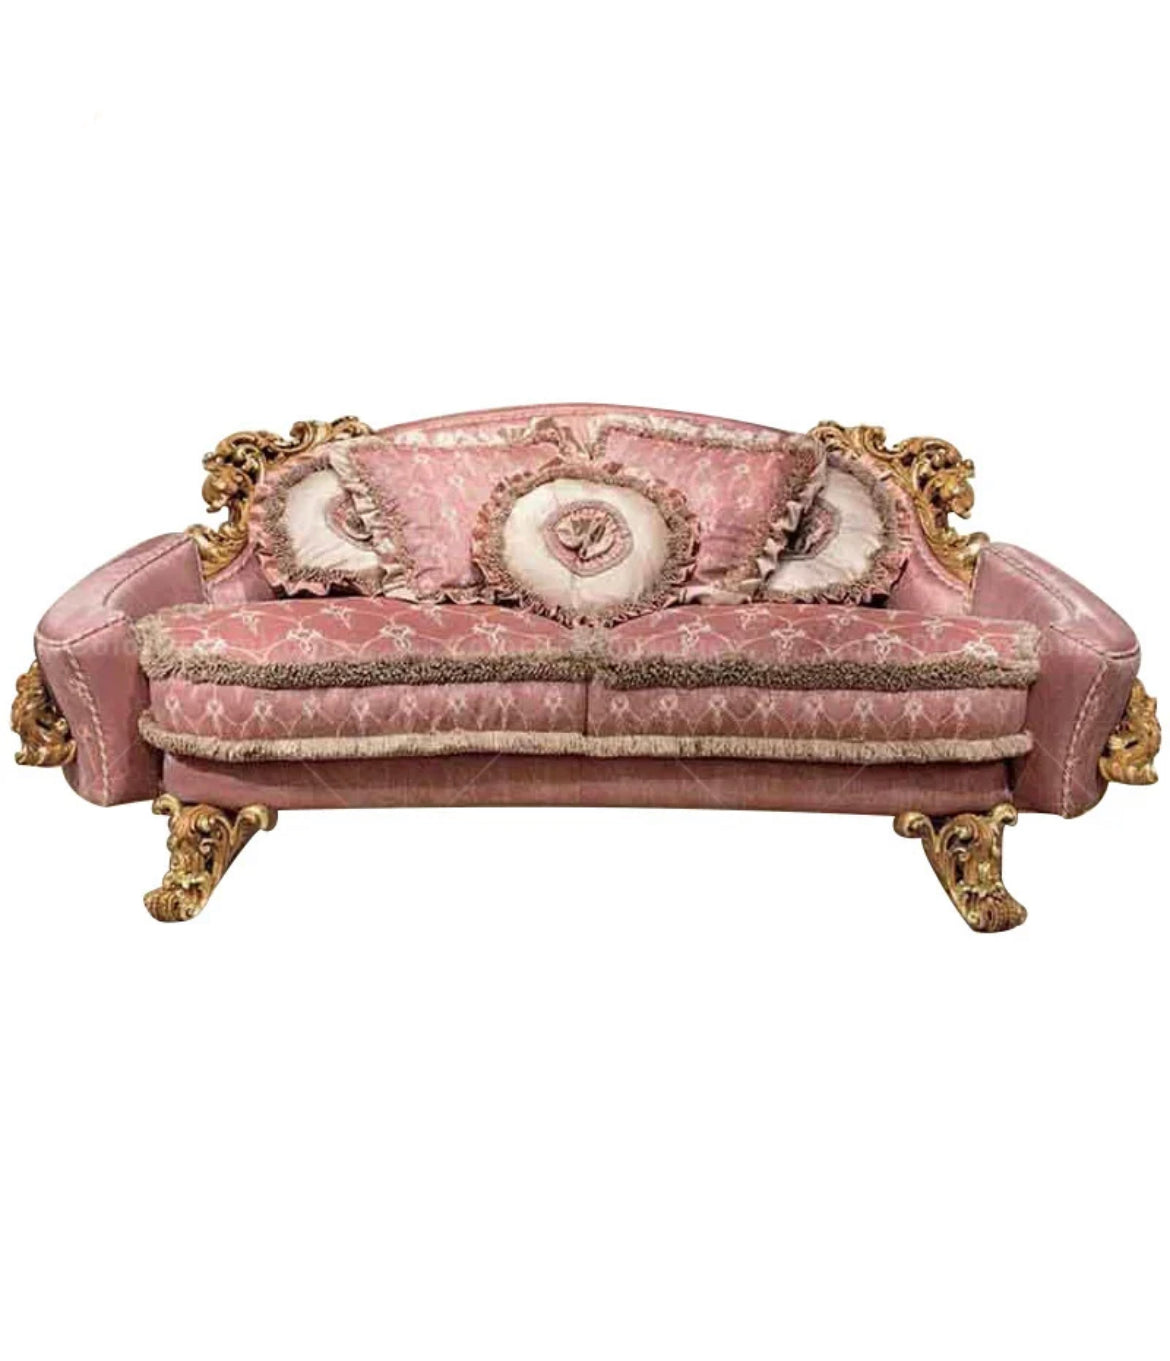 Exclusive Sectional Sofa Units Italian Luxury Carved Living Room Furniture Pink Solid Wood Baroque Design Sofa Set